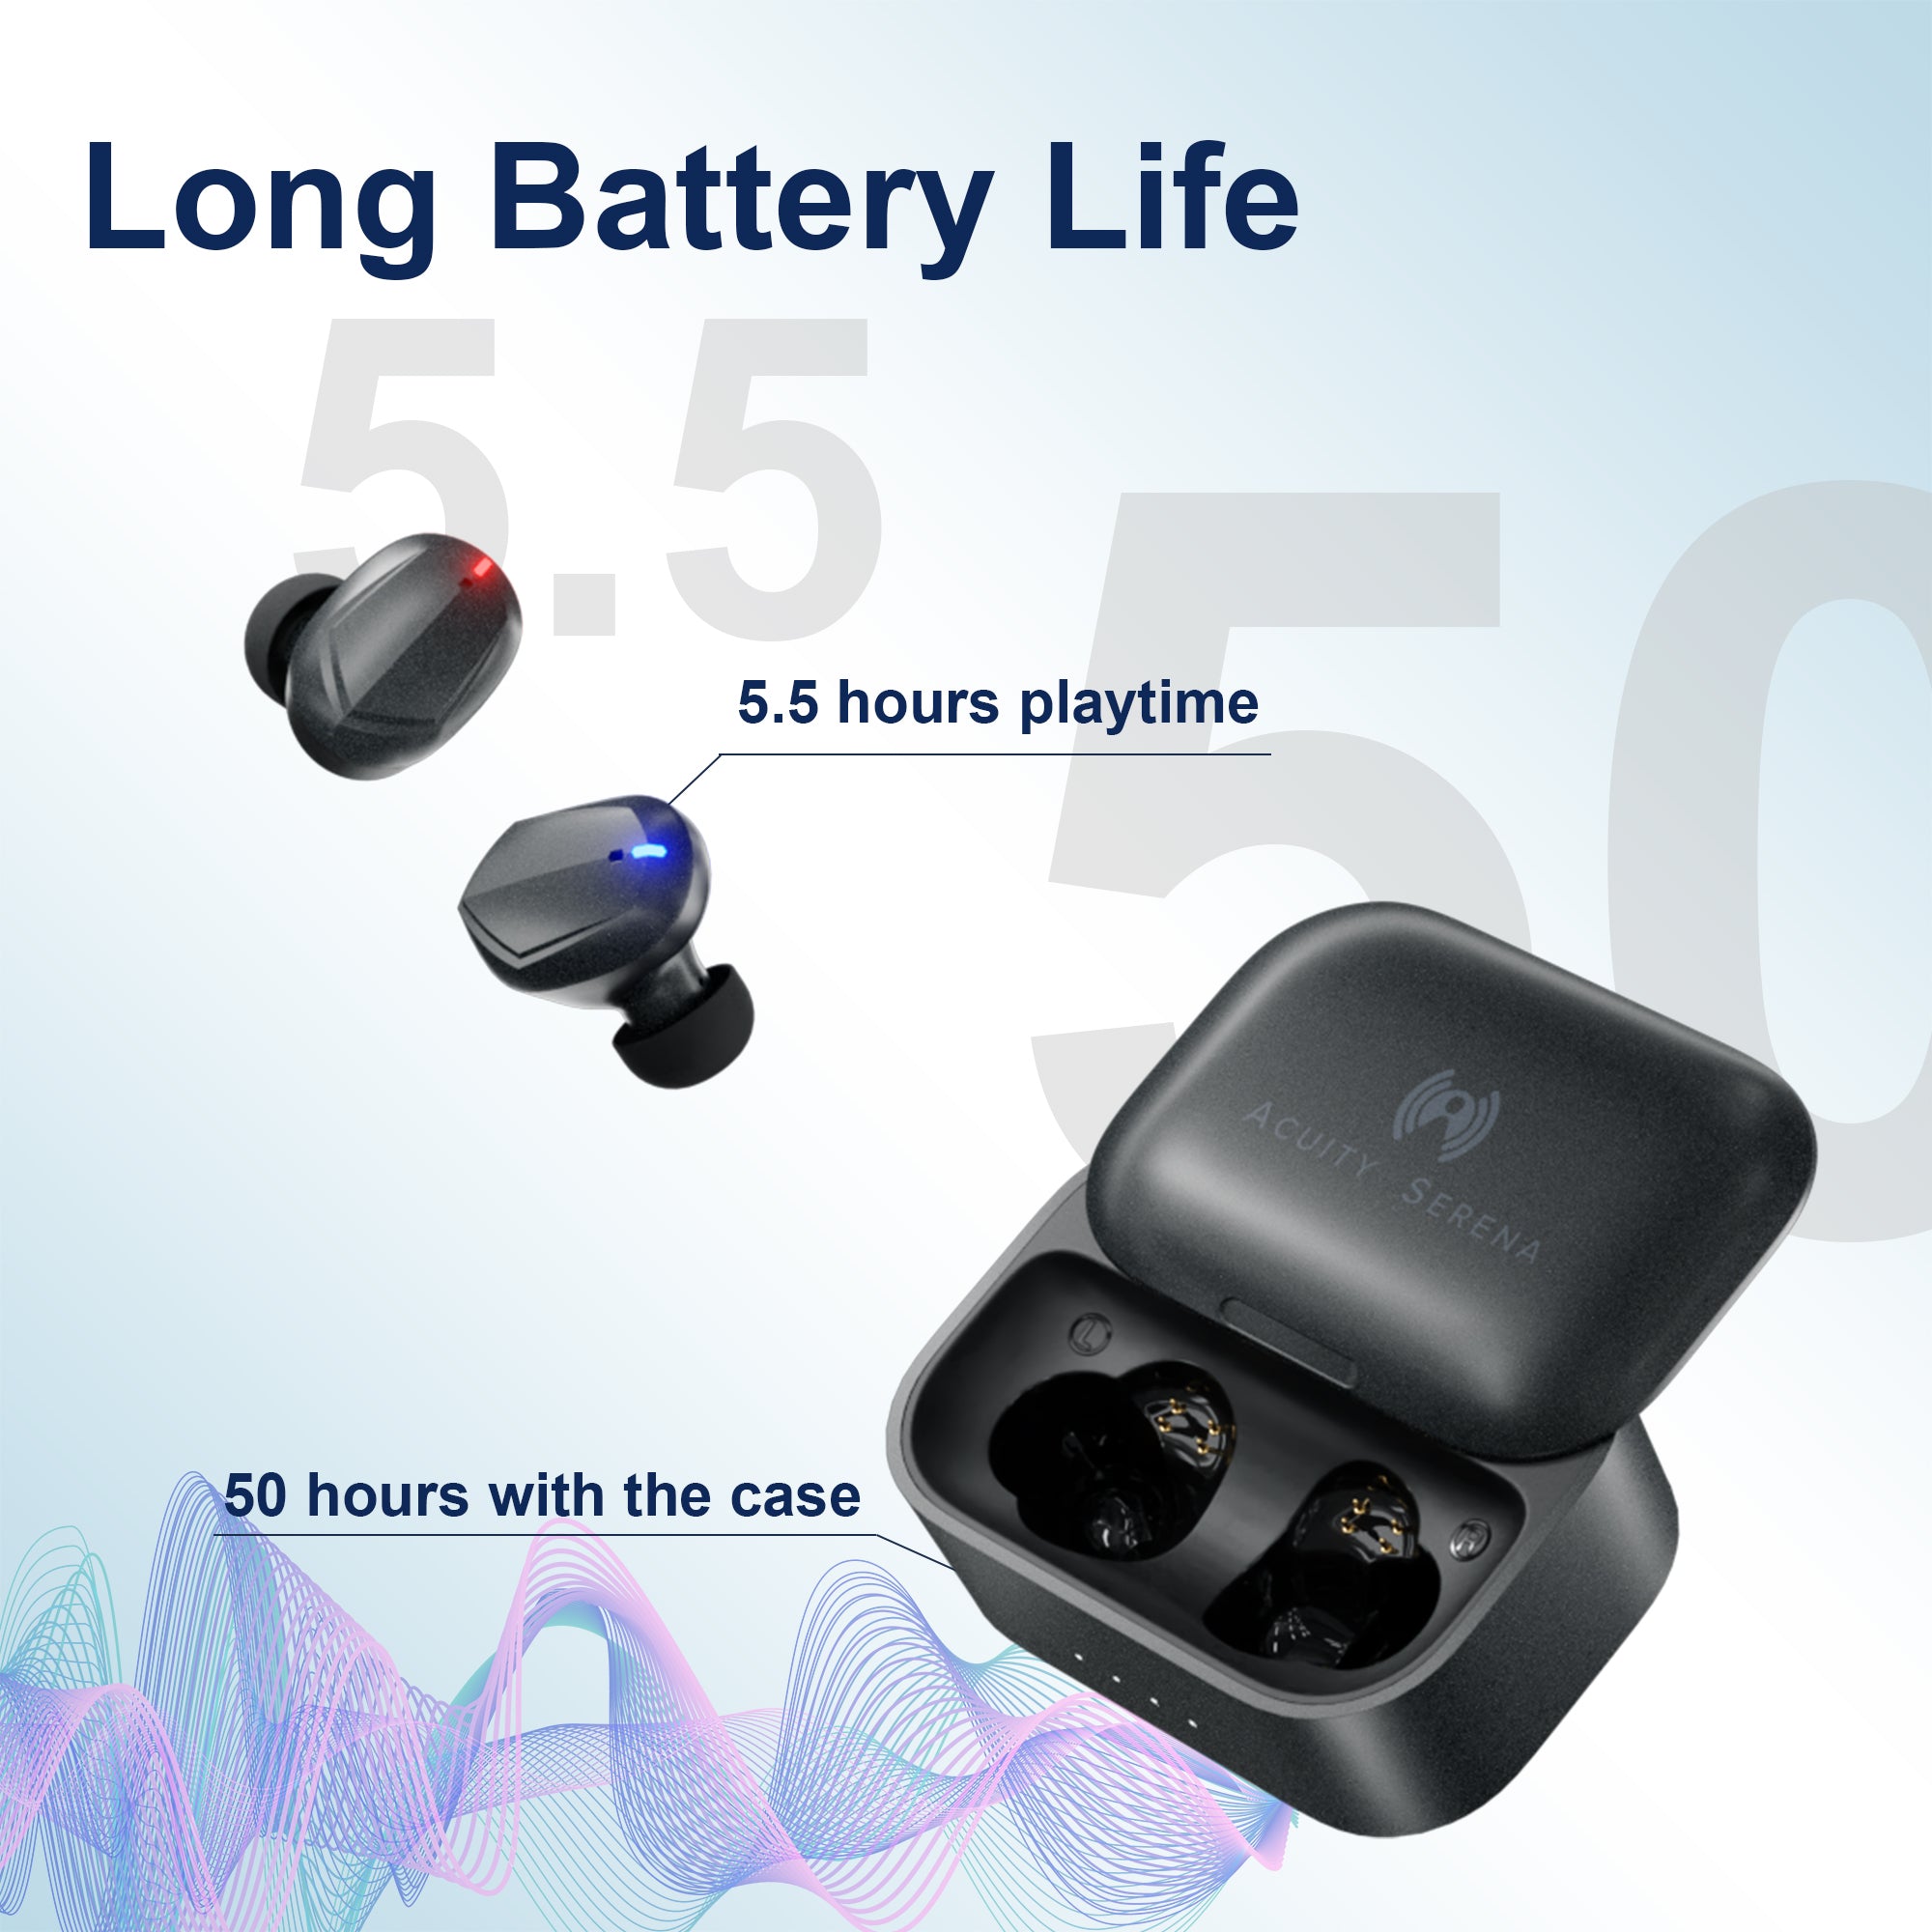 Serena Earbuds-The world’s best active noise cancellation TWS earbuds with up to 45 dB of active noise cancellation